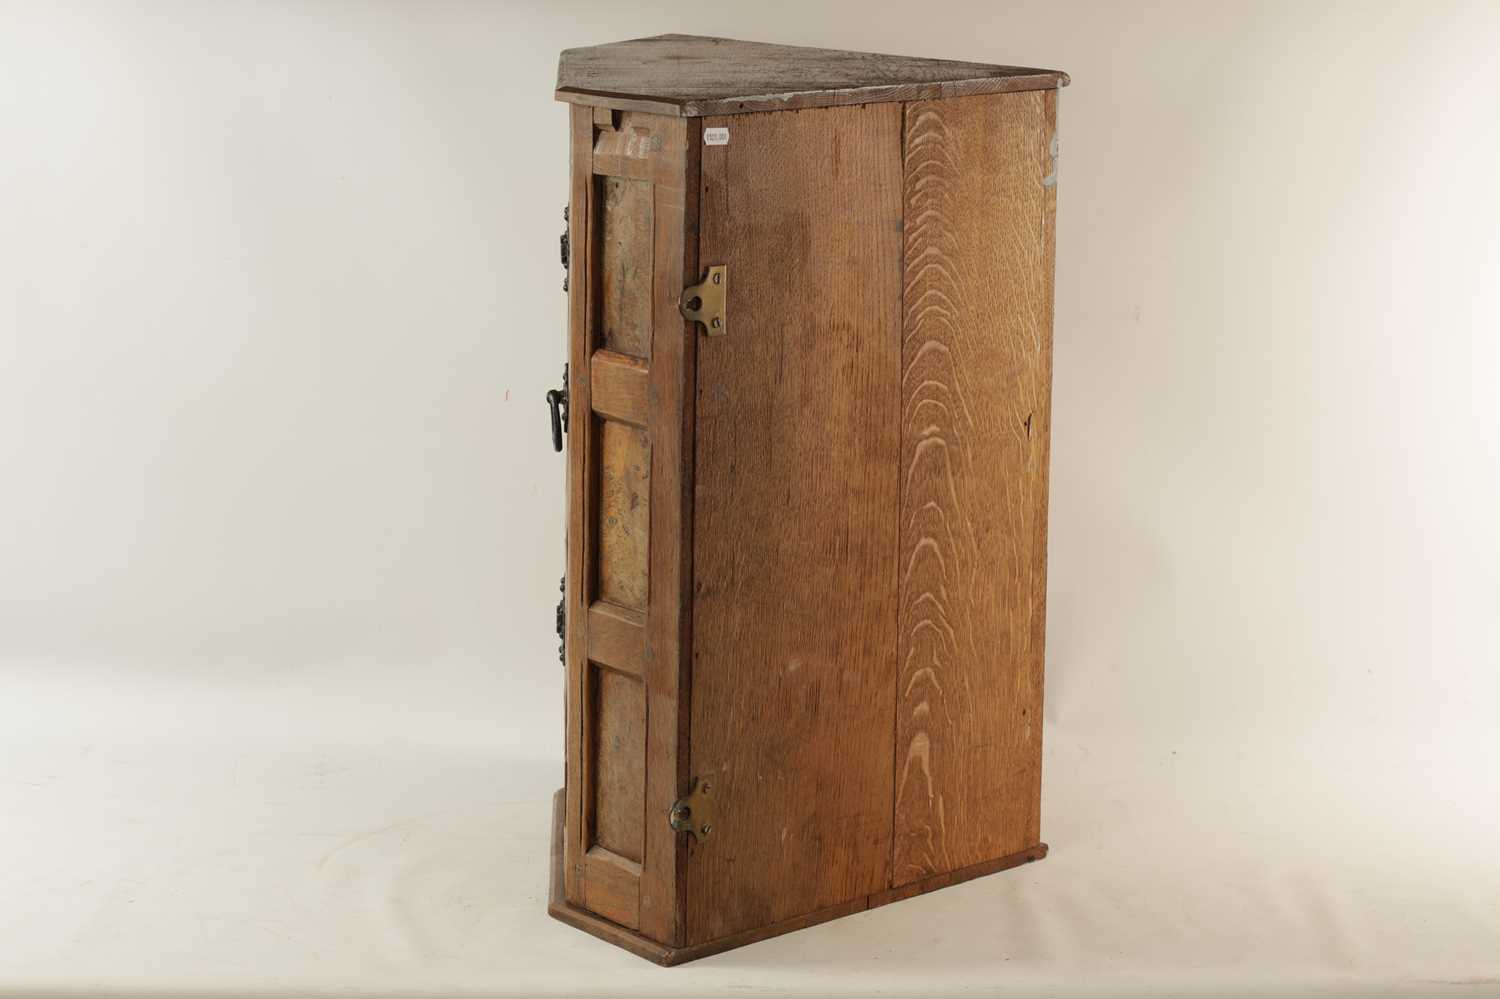 A FINE EARLY THOMAS 'GNOME MAN' WHITTAKER LIGHTLY ADZED AND BURR OAK HANGING CORNER CUPBOARD OF SMAL - Image 8 of 9